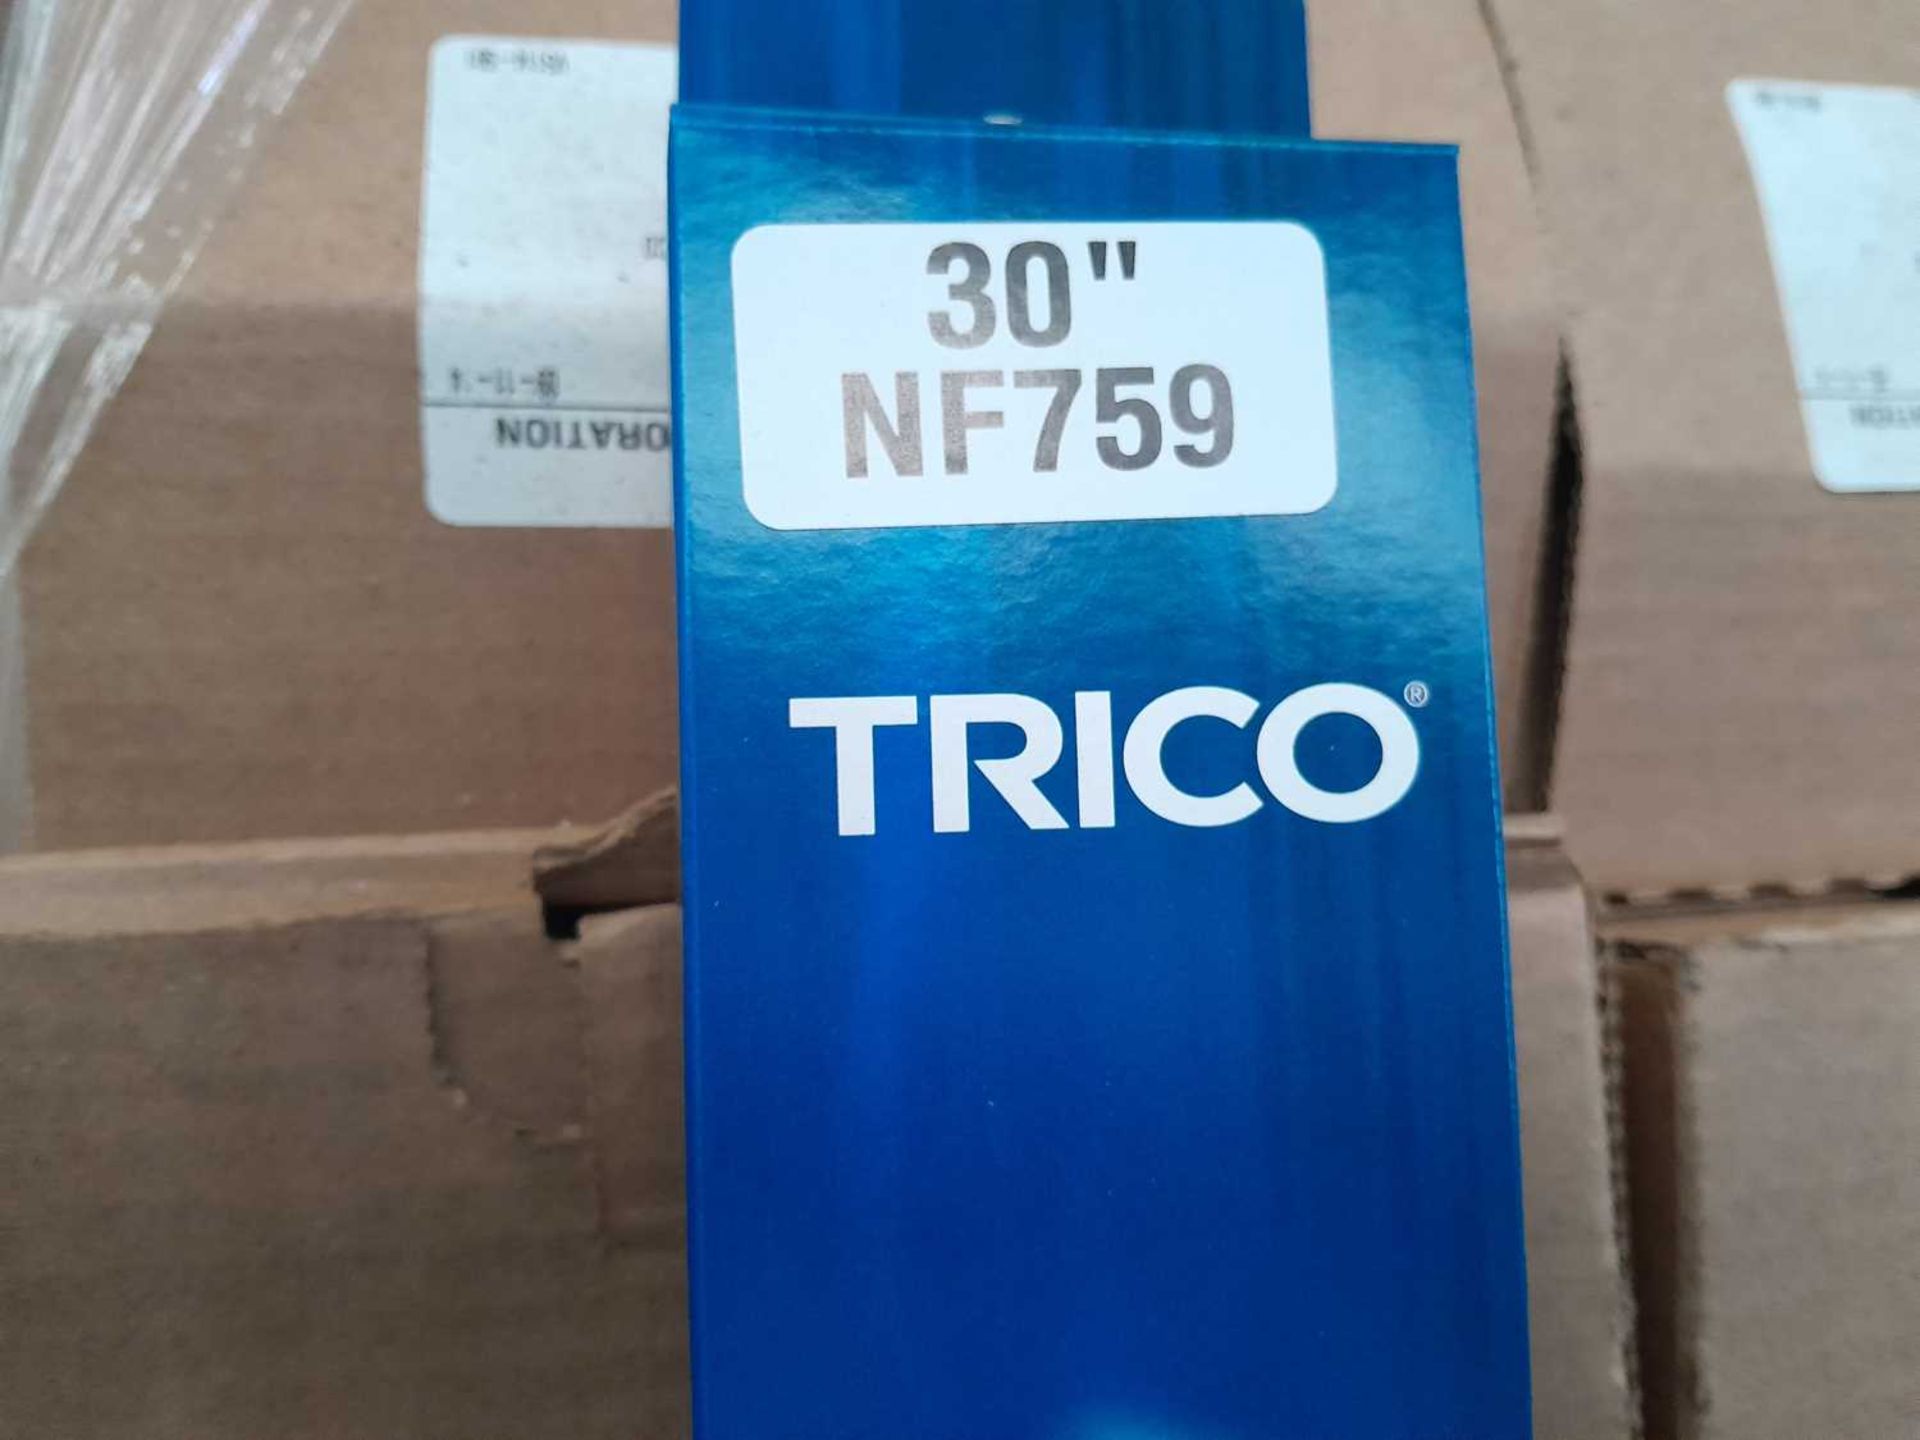 Unused Pallet of Trico NF759 Windscreen Wipers (30") - Image 2 of 3